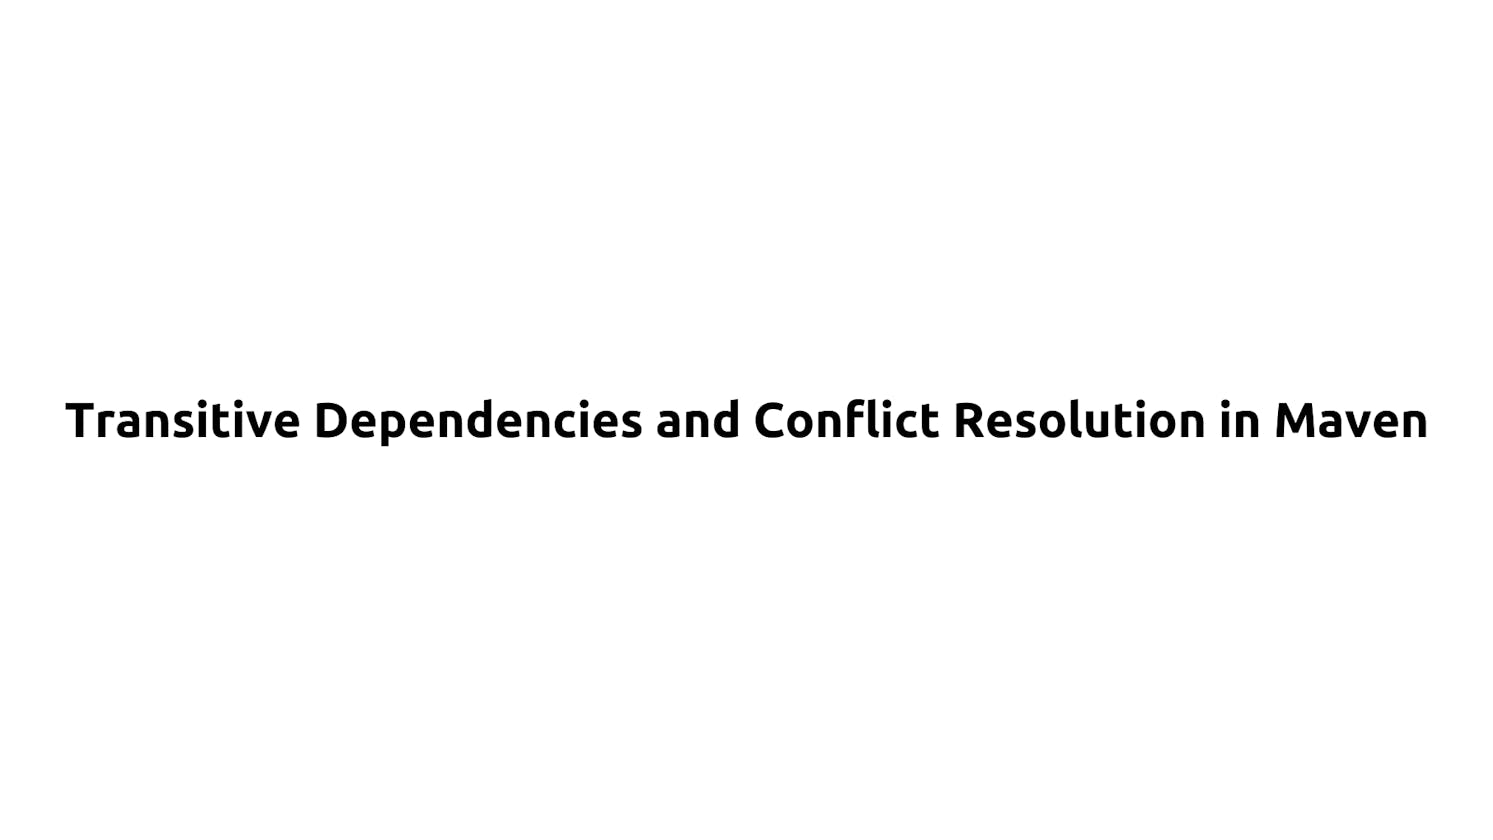 Transitive Dependencies and Conflict Resolution in Maven